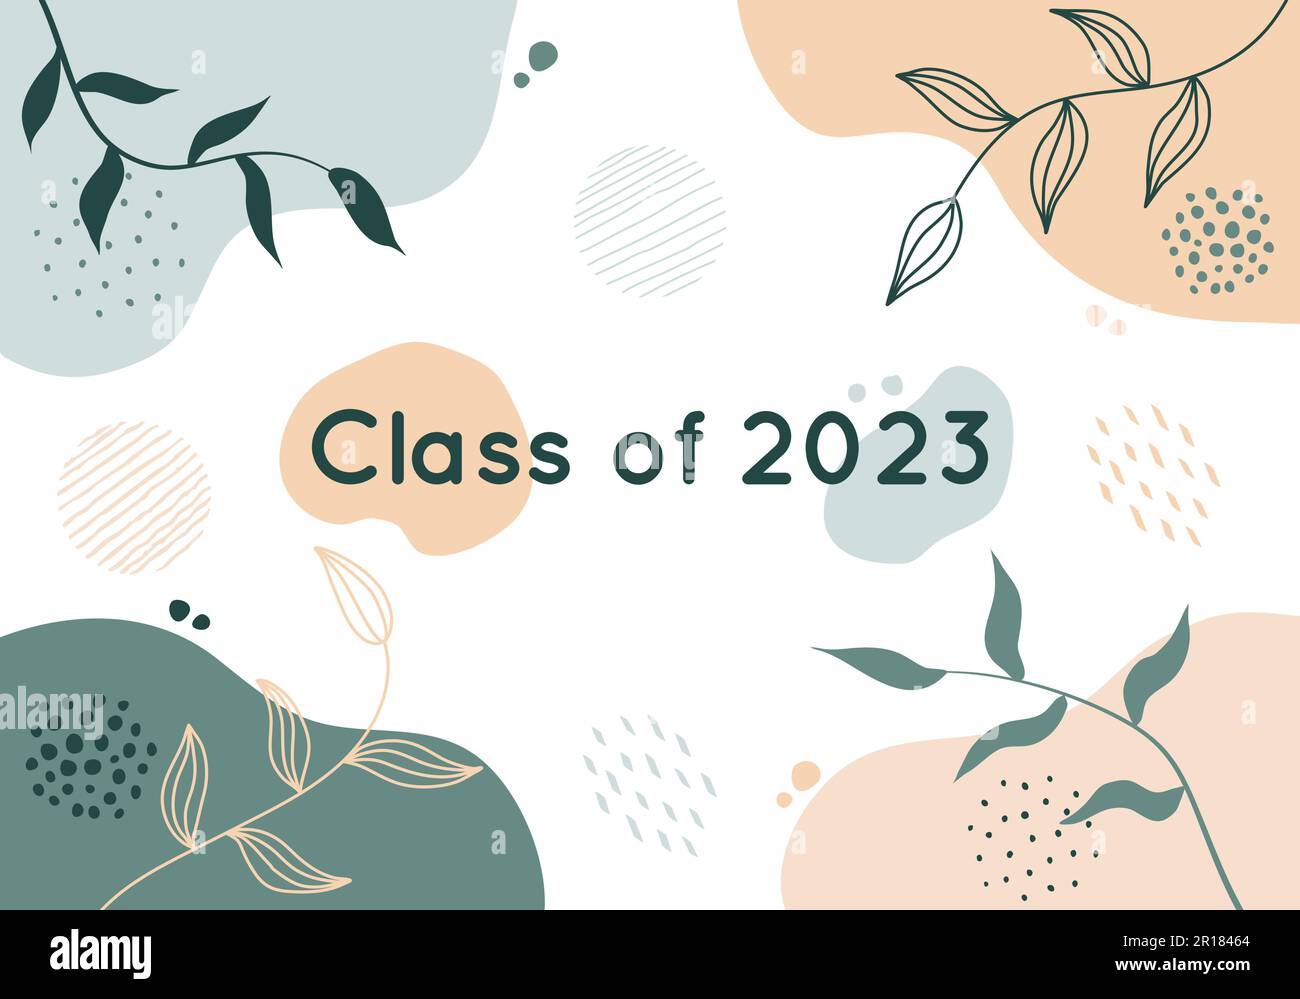 Class of 2023 Boho Art Style Banner Vector Illustration. Academic year student graduation party graphic resource. Floral and Trendy neutral color Stock Vector